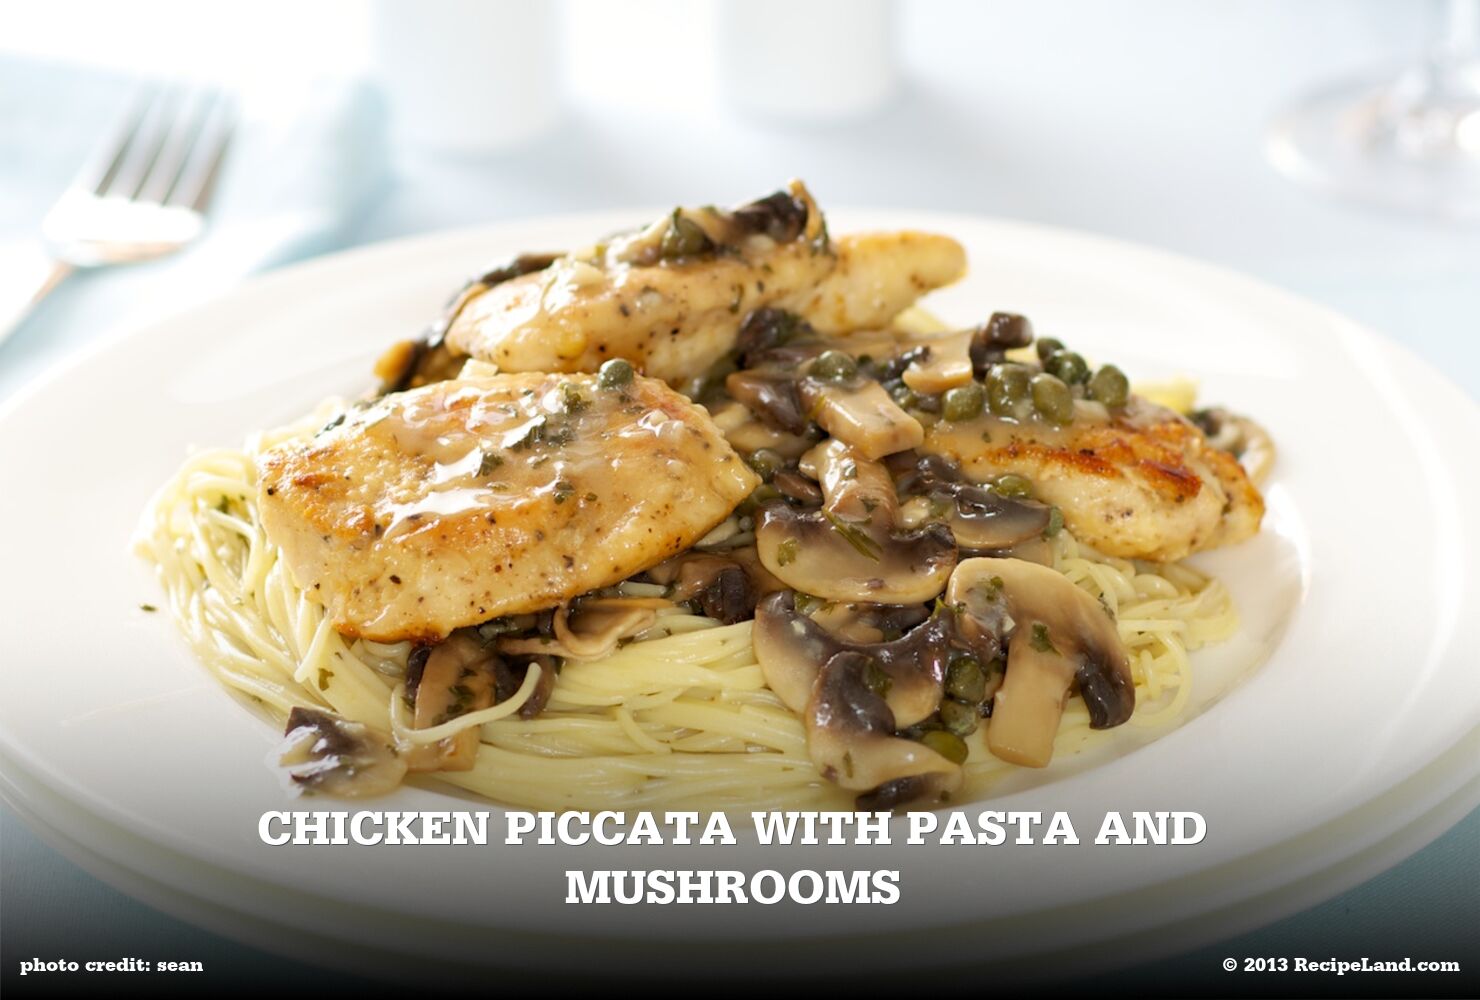 Chicken Piccata with pasta and mushrooms